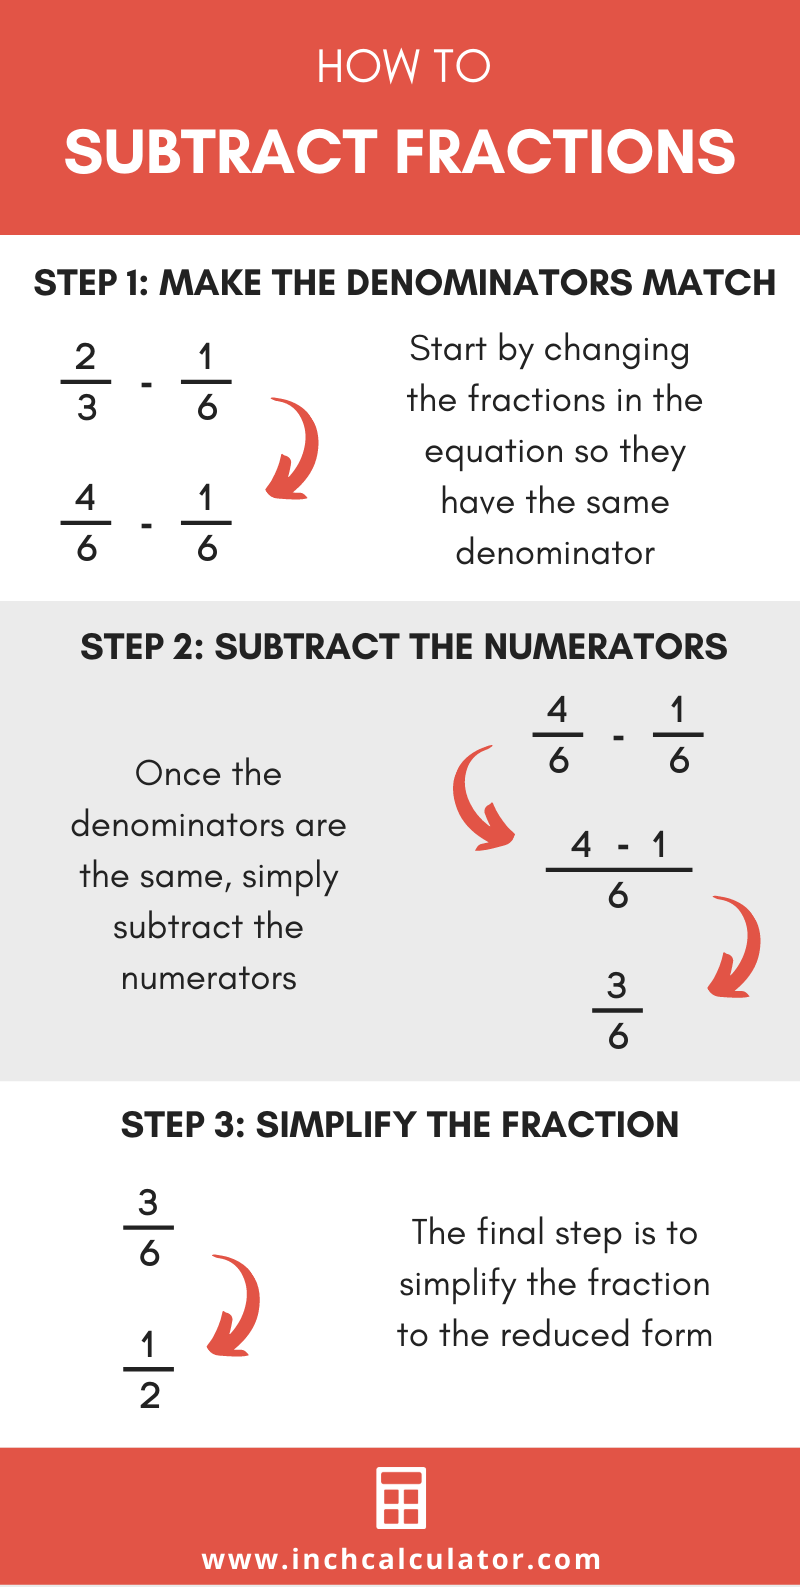 Share subtract fractions calculator